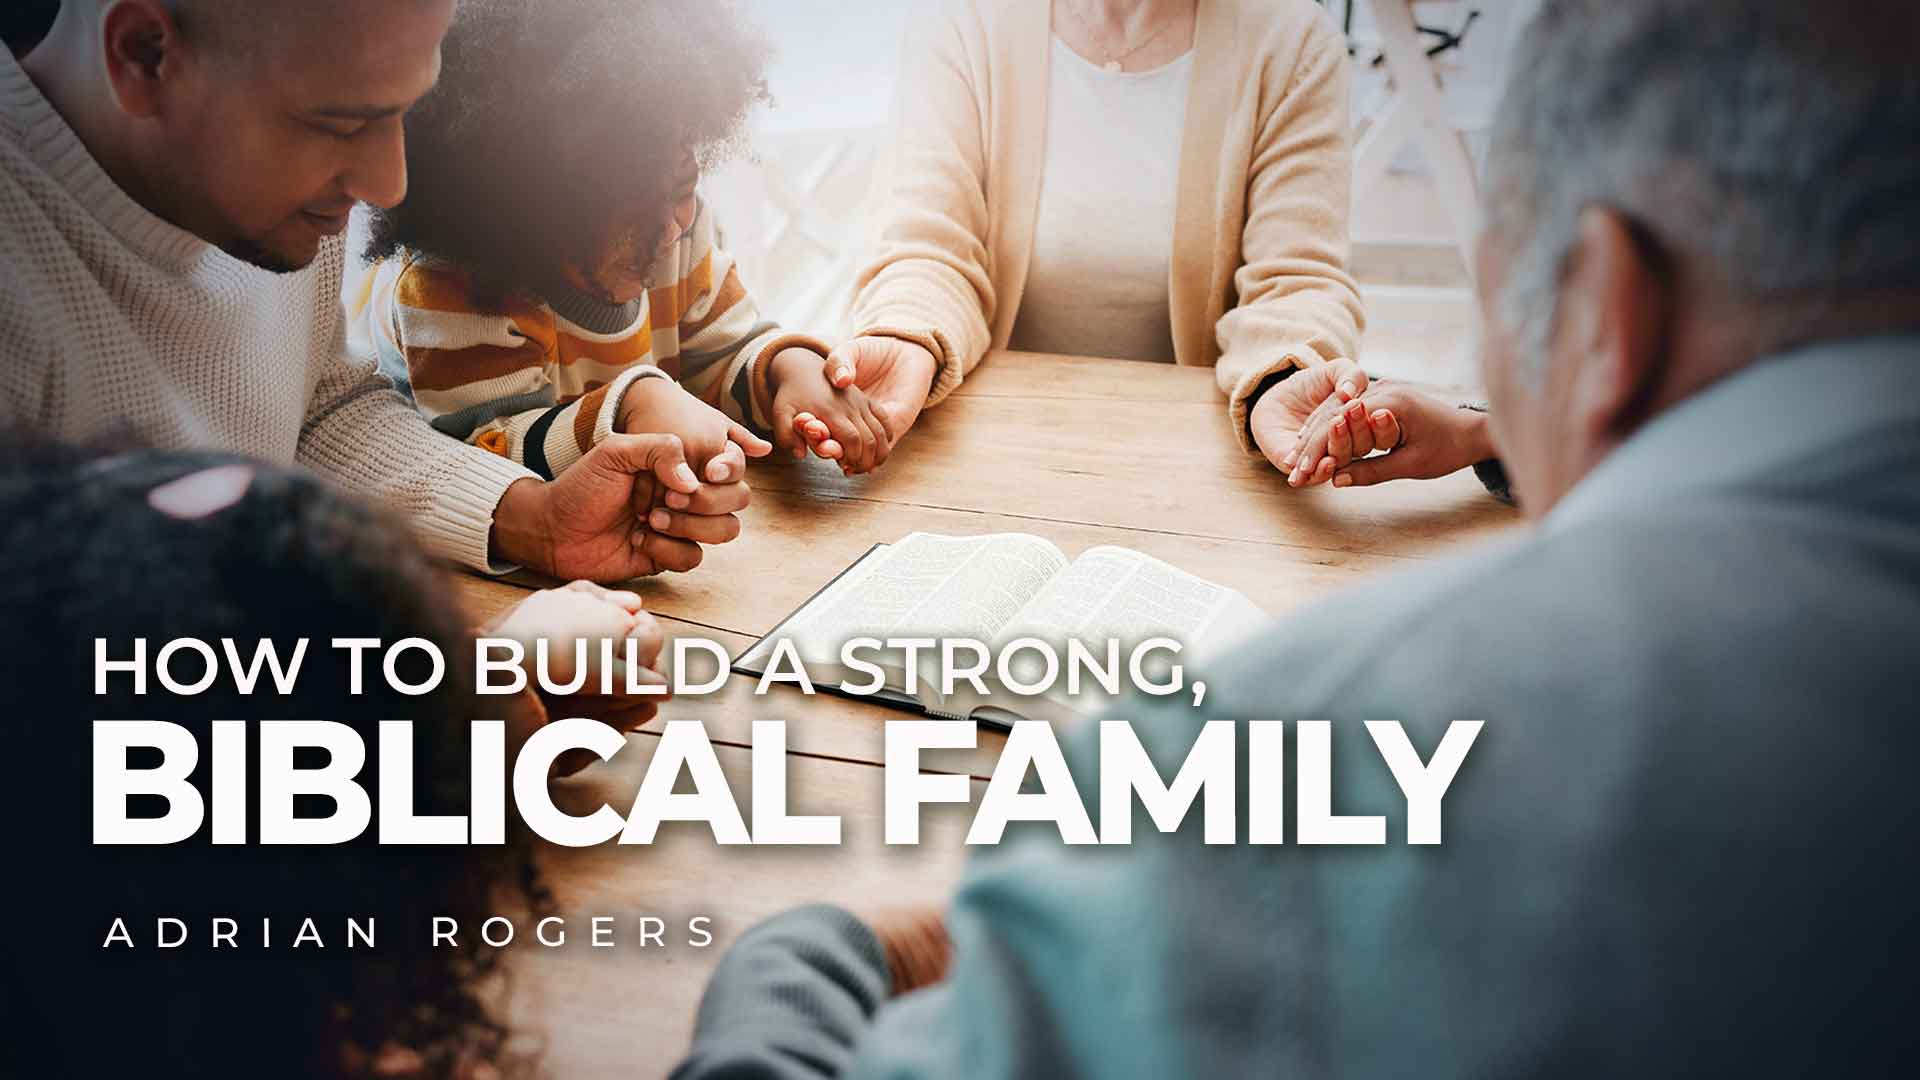 How to Build a Strong, Biblical Family 1920x1080